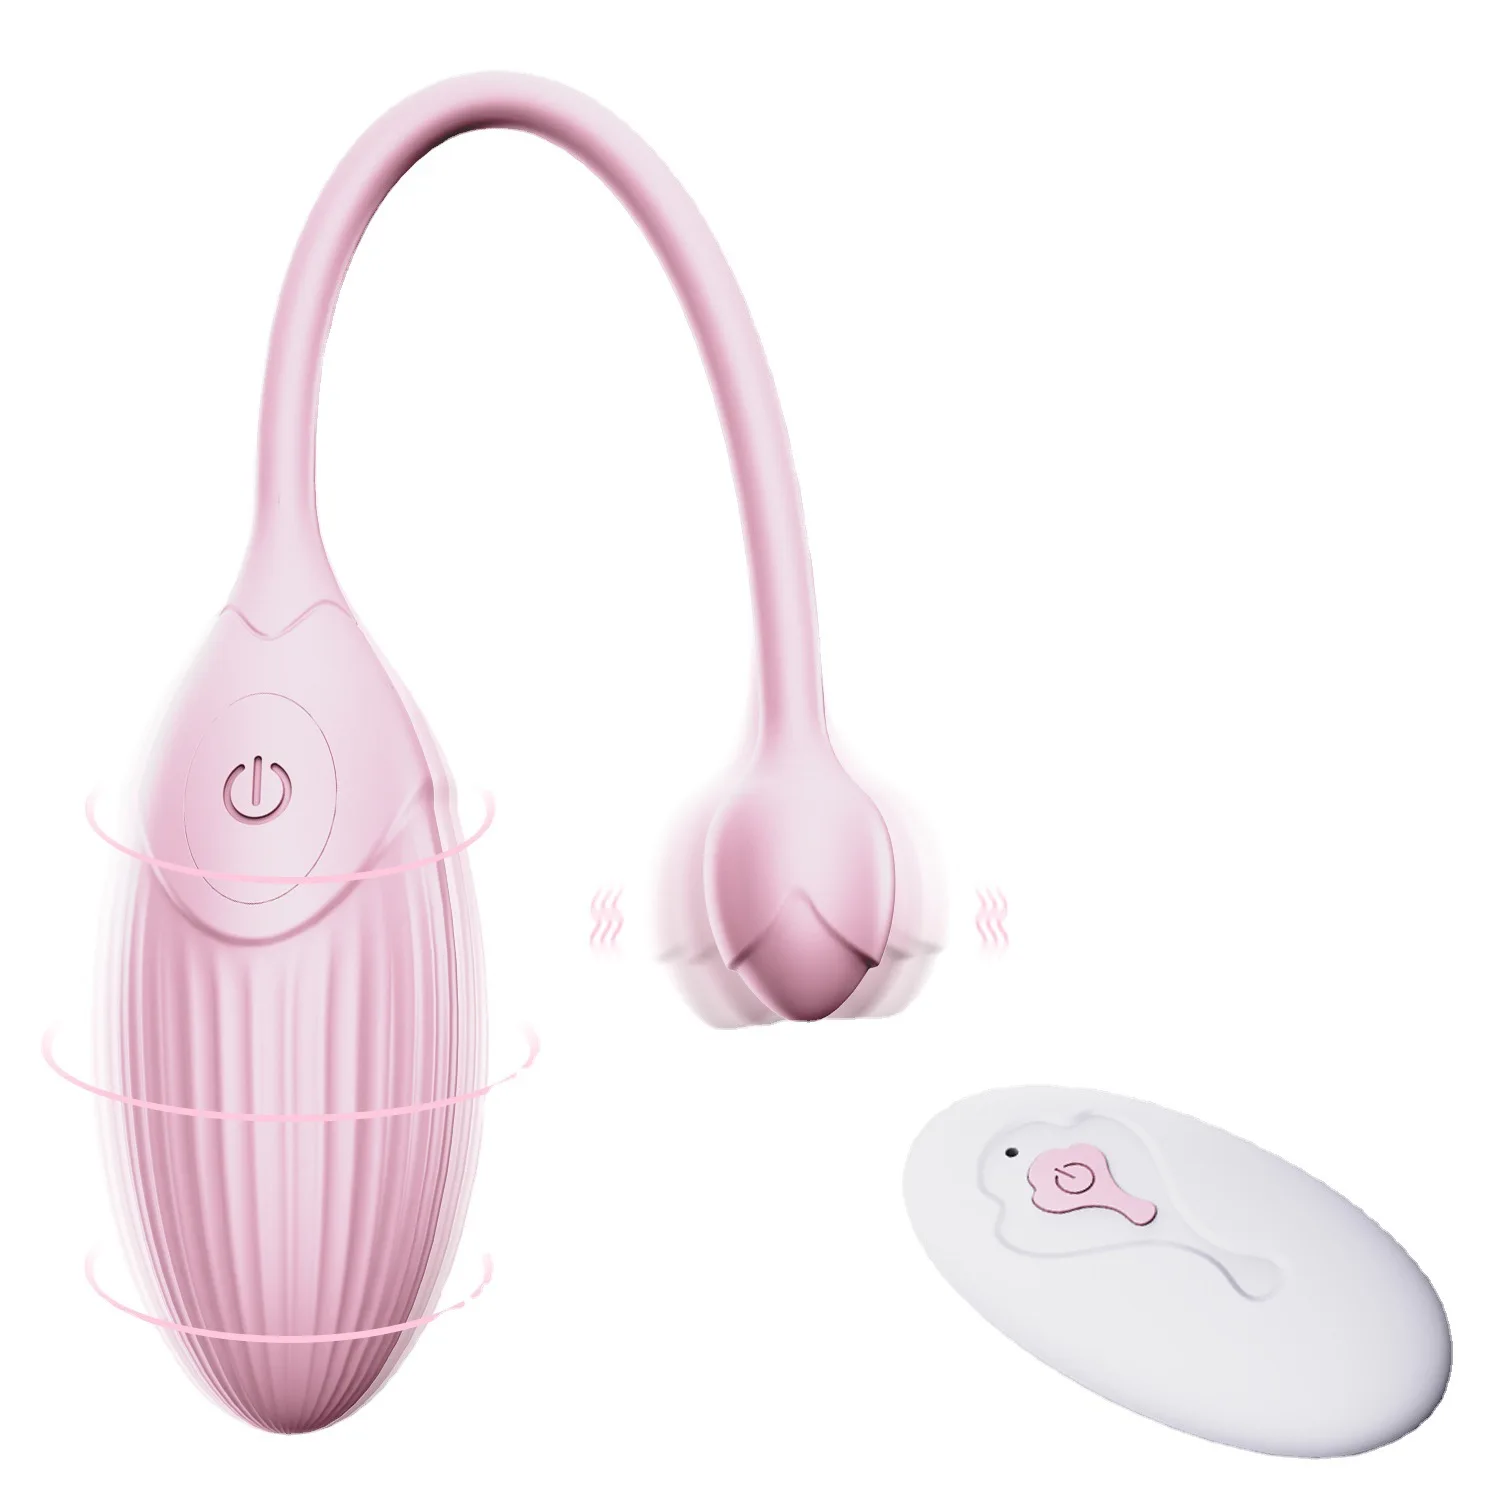 

Multi Frequency Remote Control Vibration Egg Jumping Flirting and Masturbation Wearing G-spot Stimulation Sex Toys for Couples